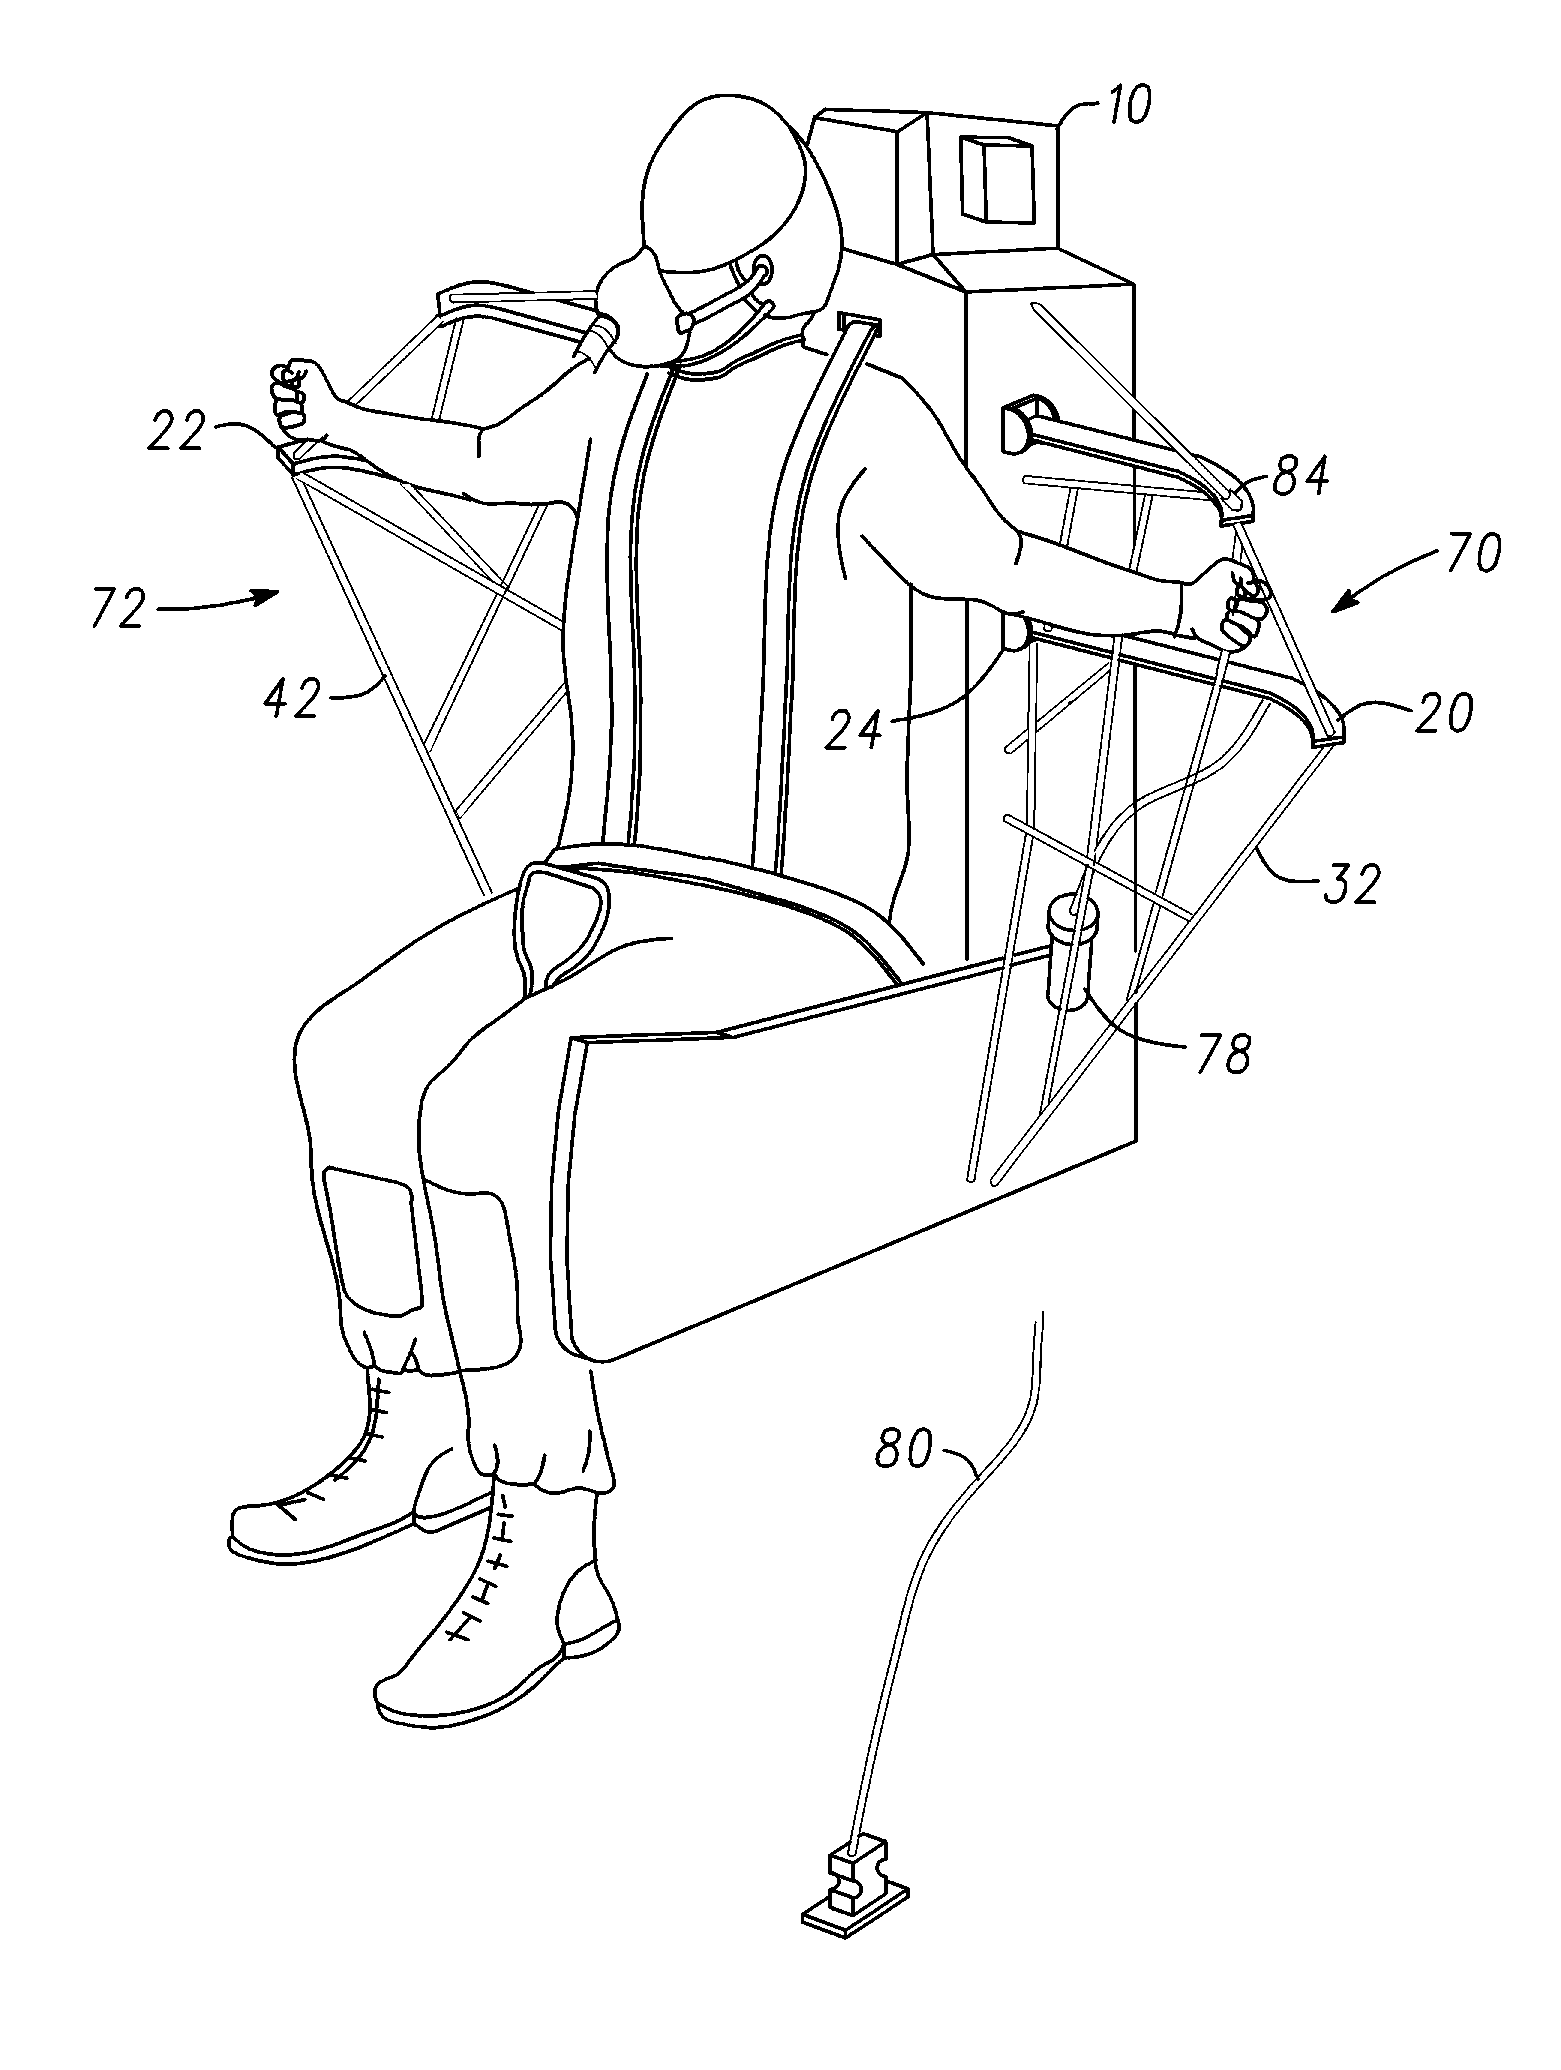 Passive ejection seat arm flail restraint apparatus and method